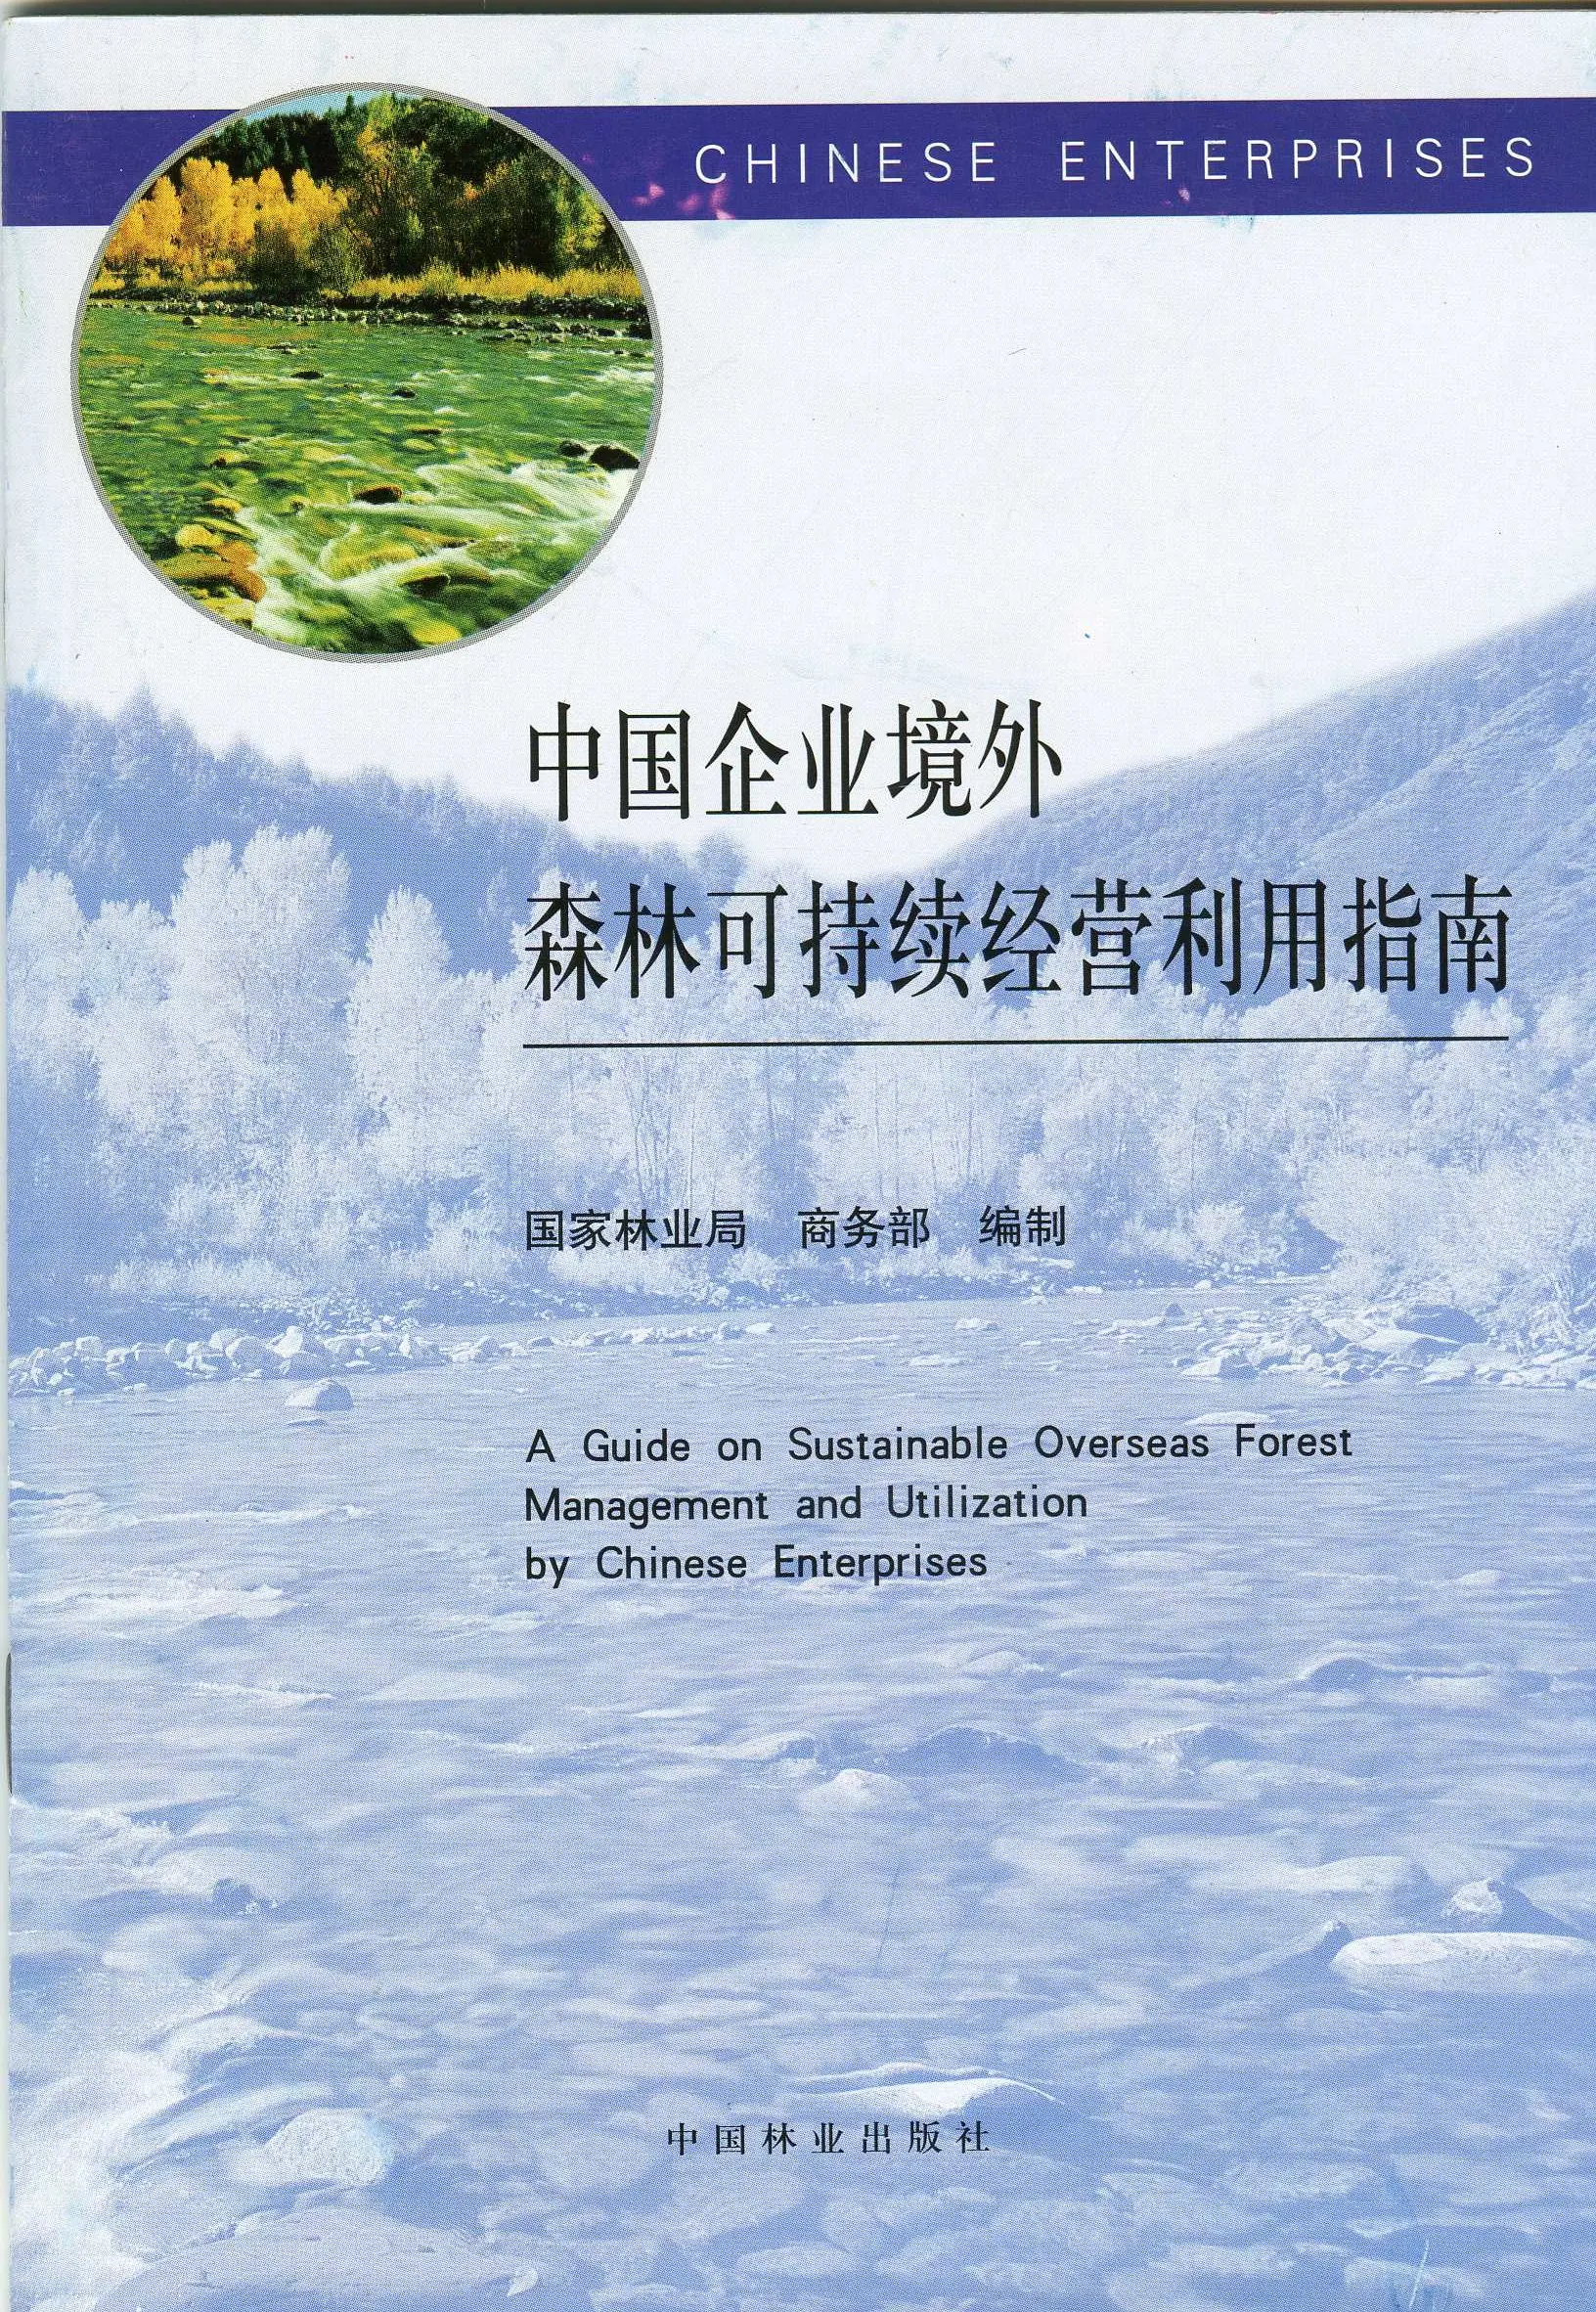 A Guide on Sustainable Overseas Forest Management and Utilization by Chinese Enterprises